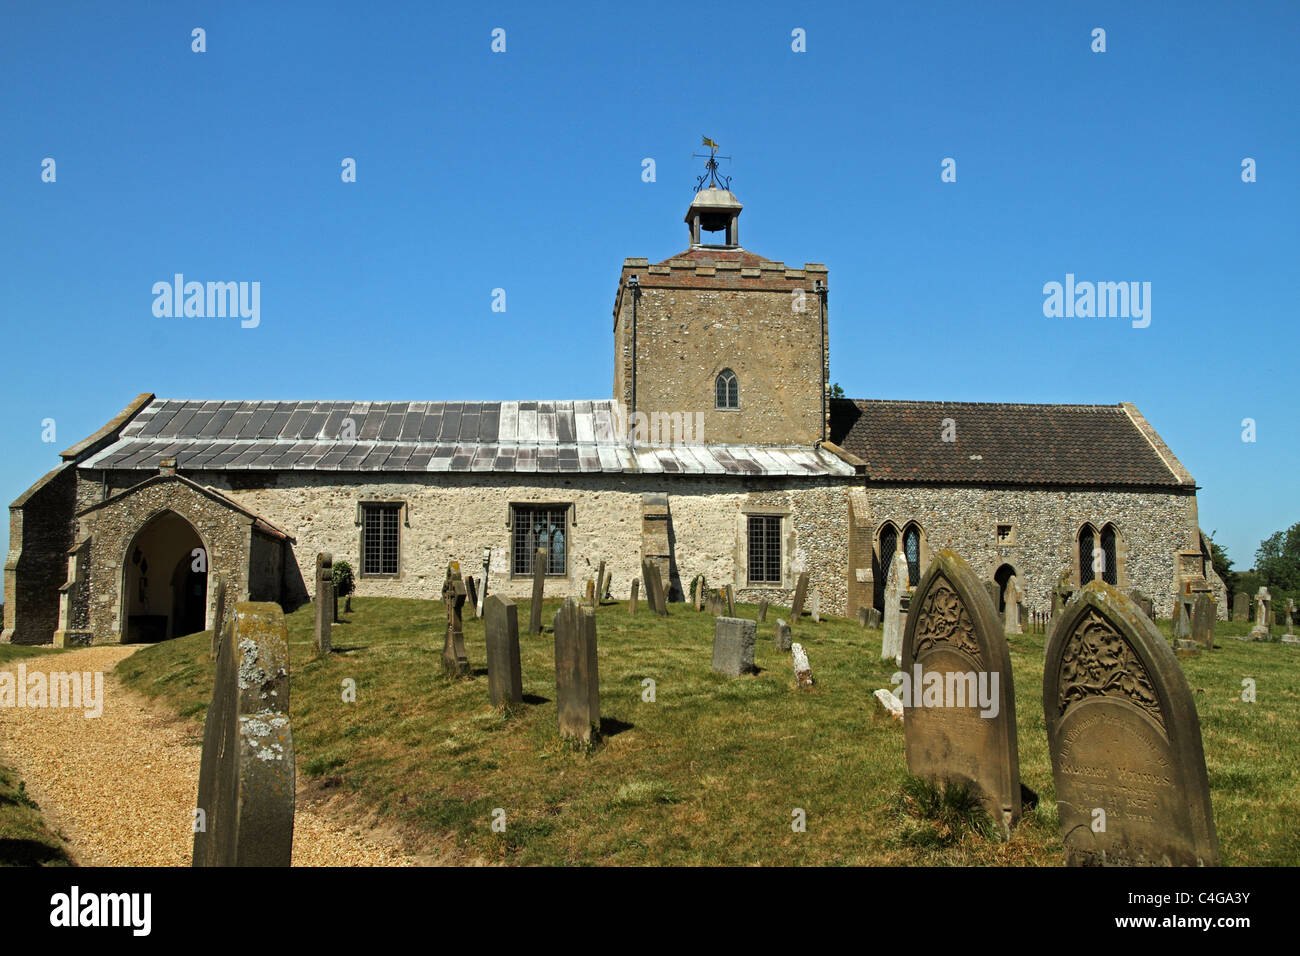 Eglise St Clement, Burnham Overy, Norfolk, Angleterre Banque D'Images